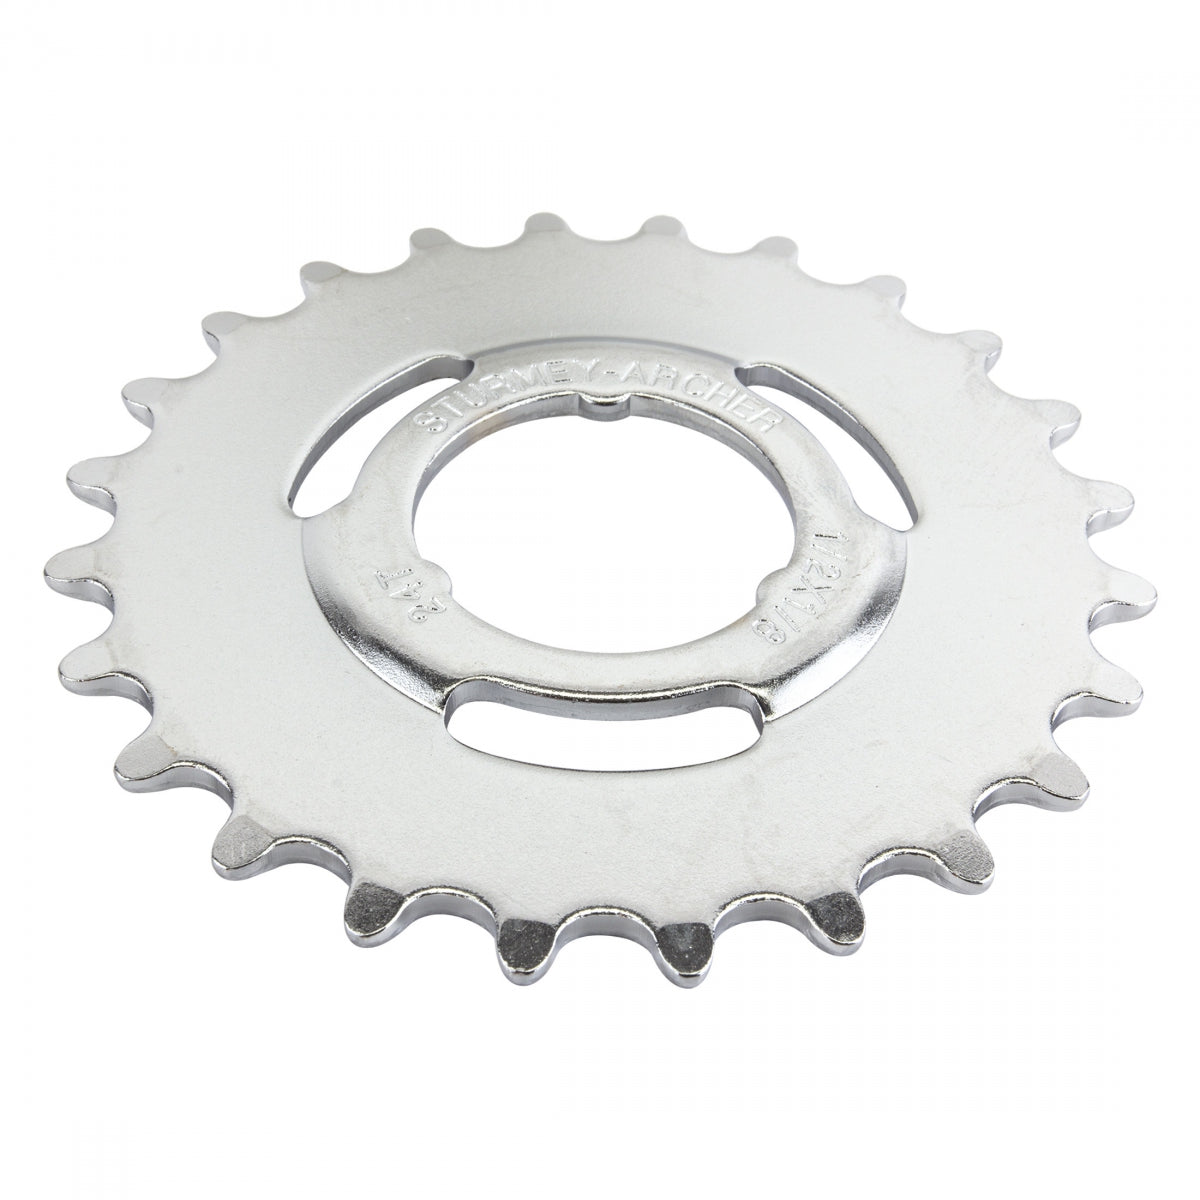 Hub Part S/A Hsl-876 Sprocket Dished 24T 1/8 Chrome Plated